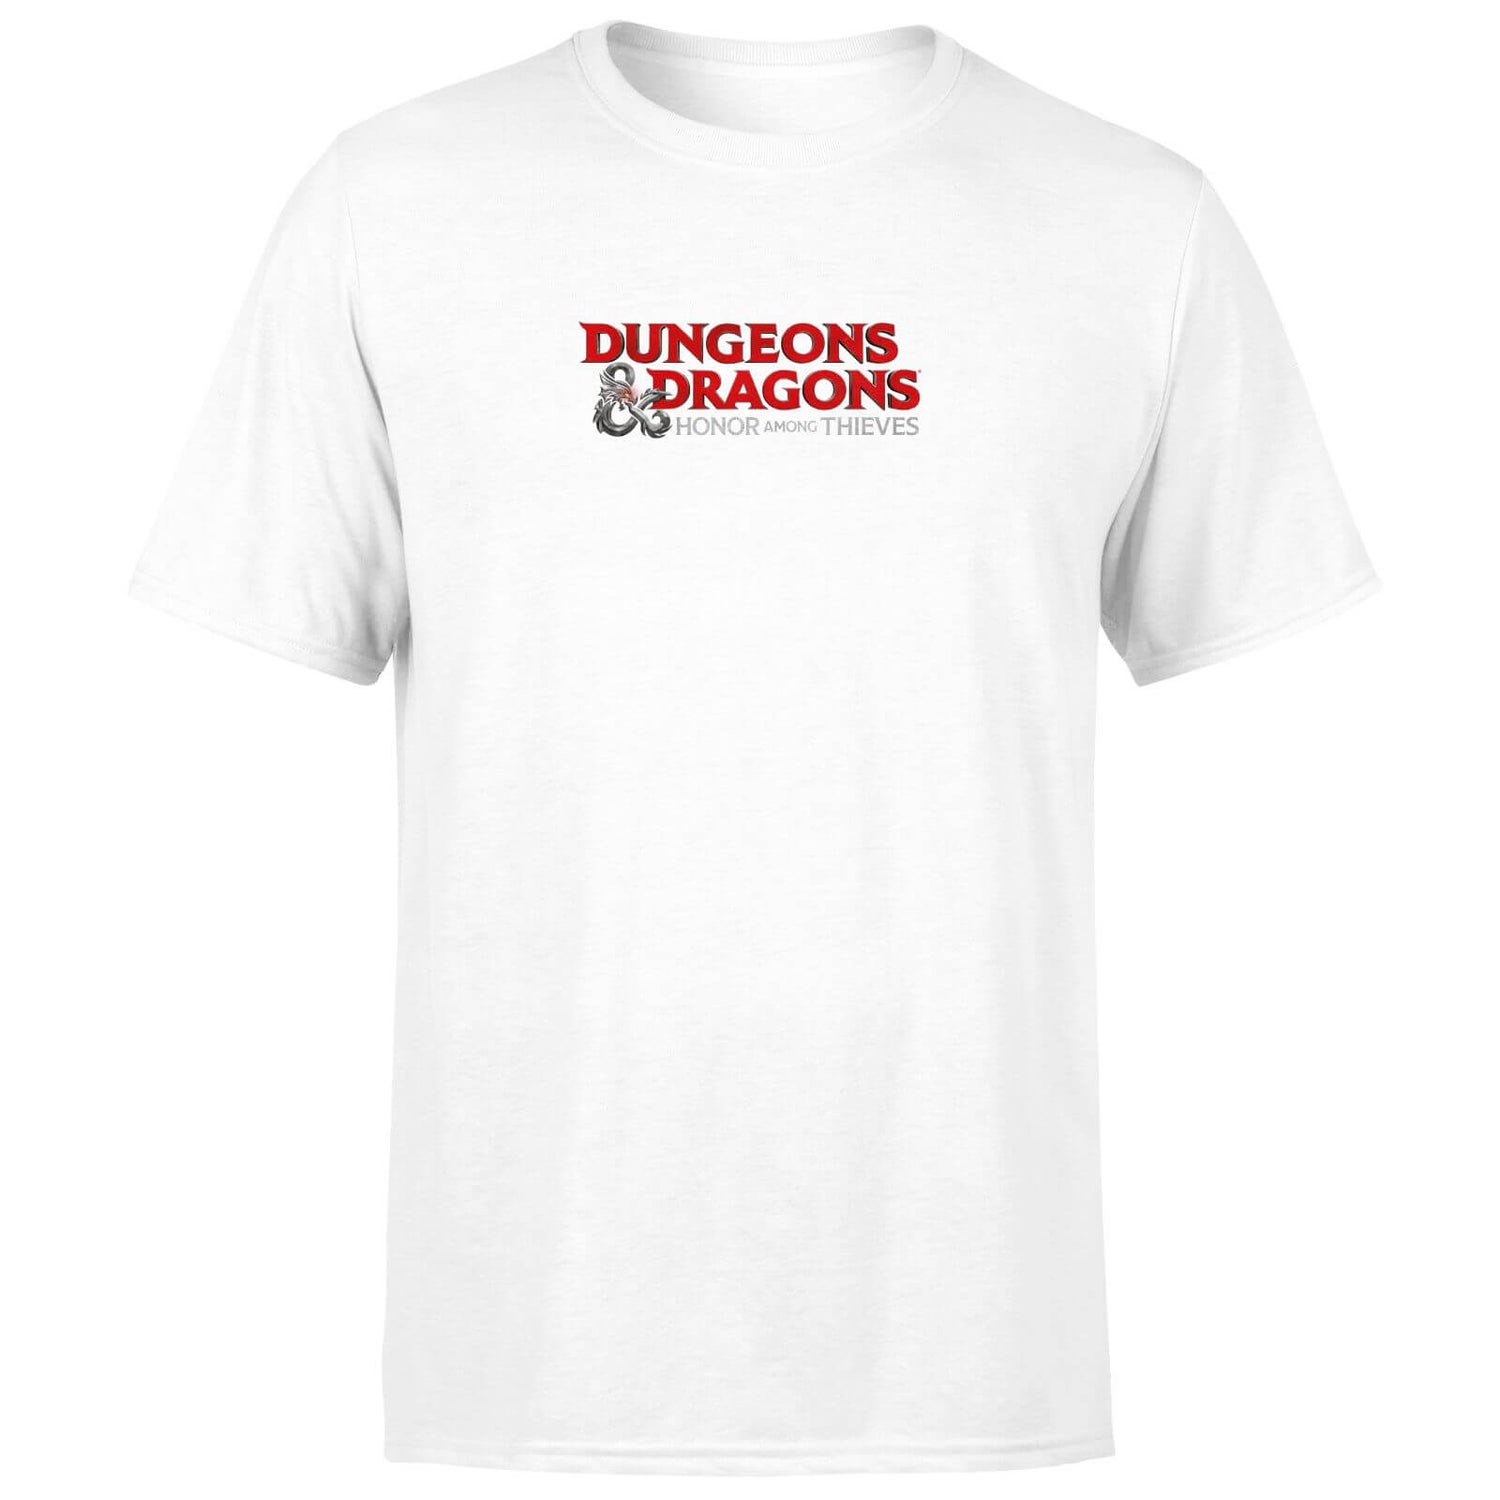 Dungeons & Dragons Honor Among Thieves Men's T-Shirt - White